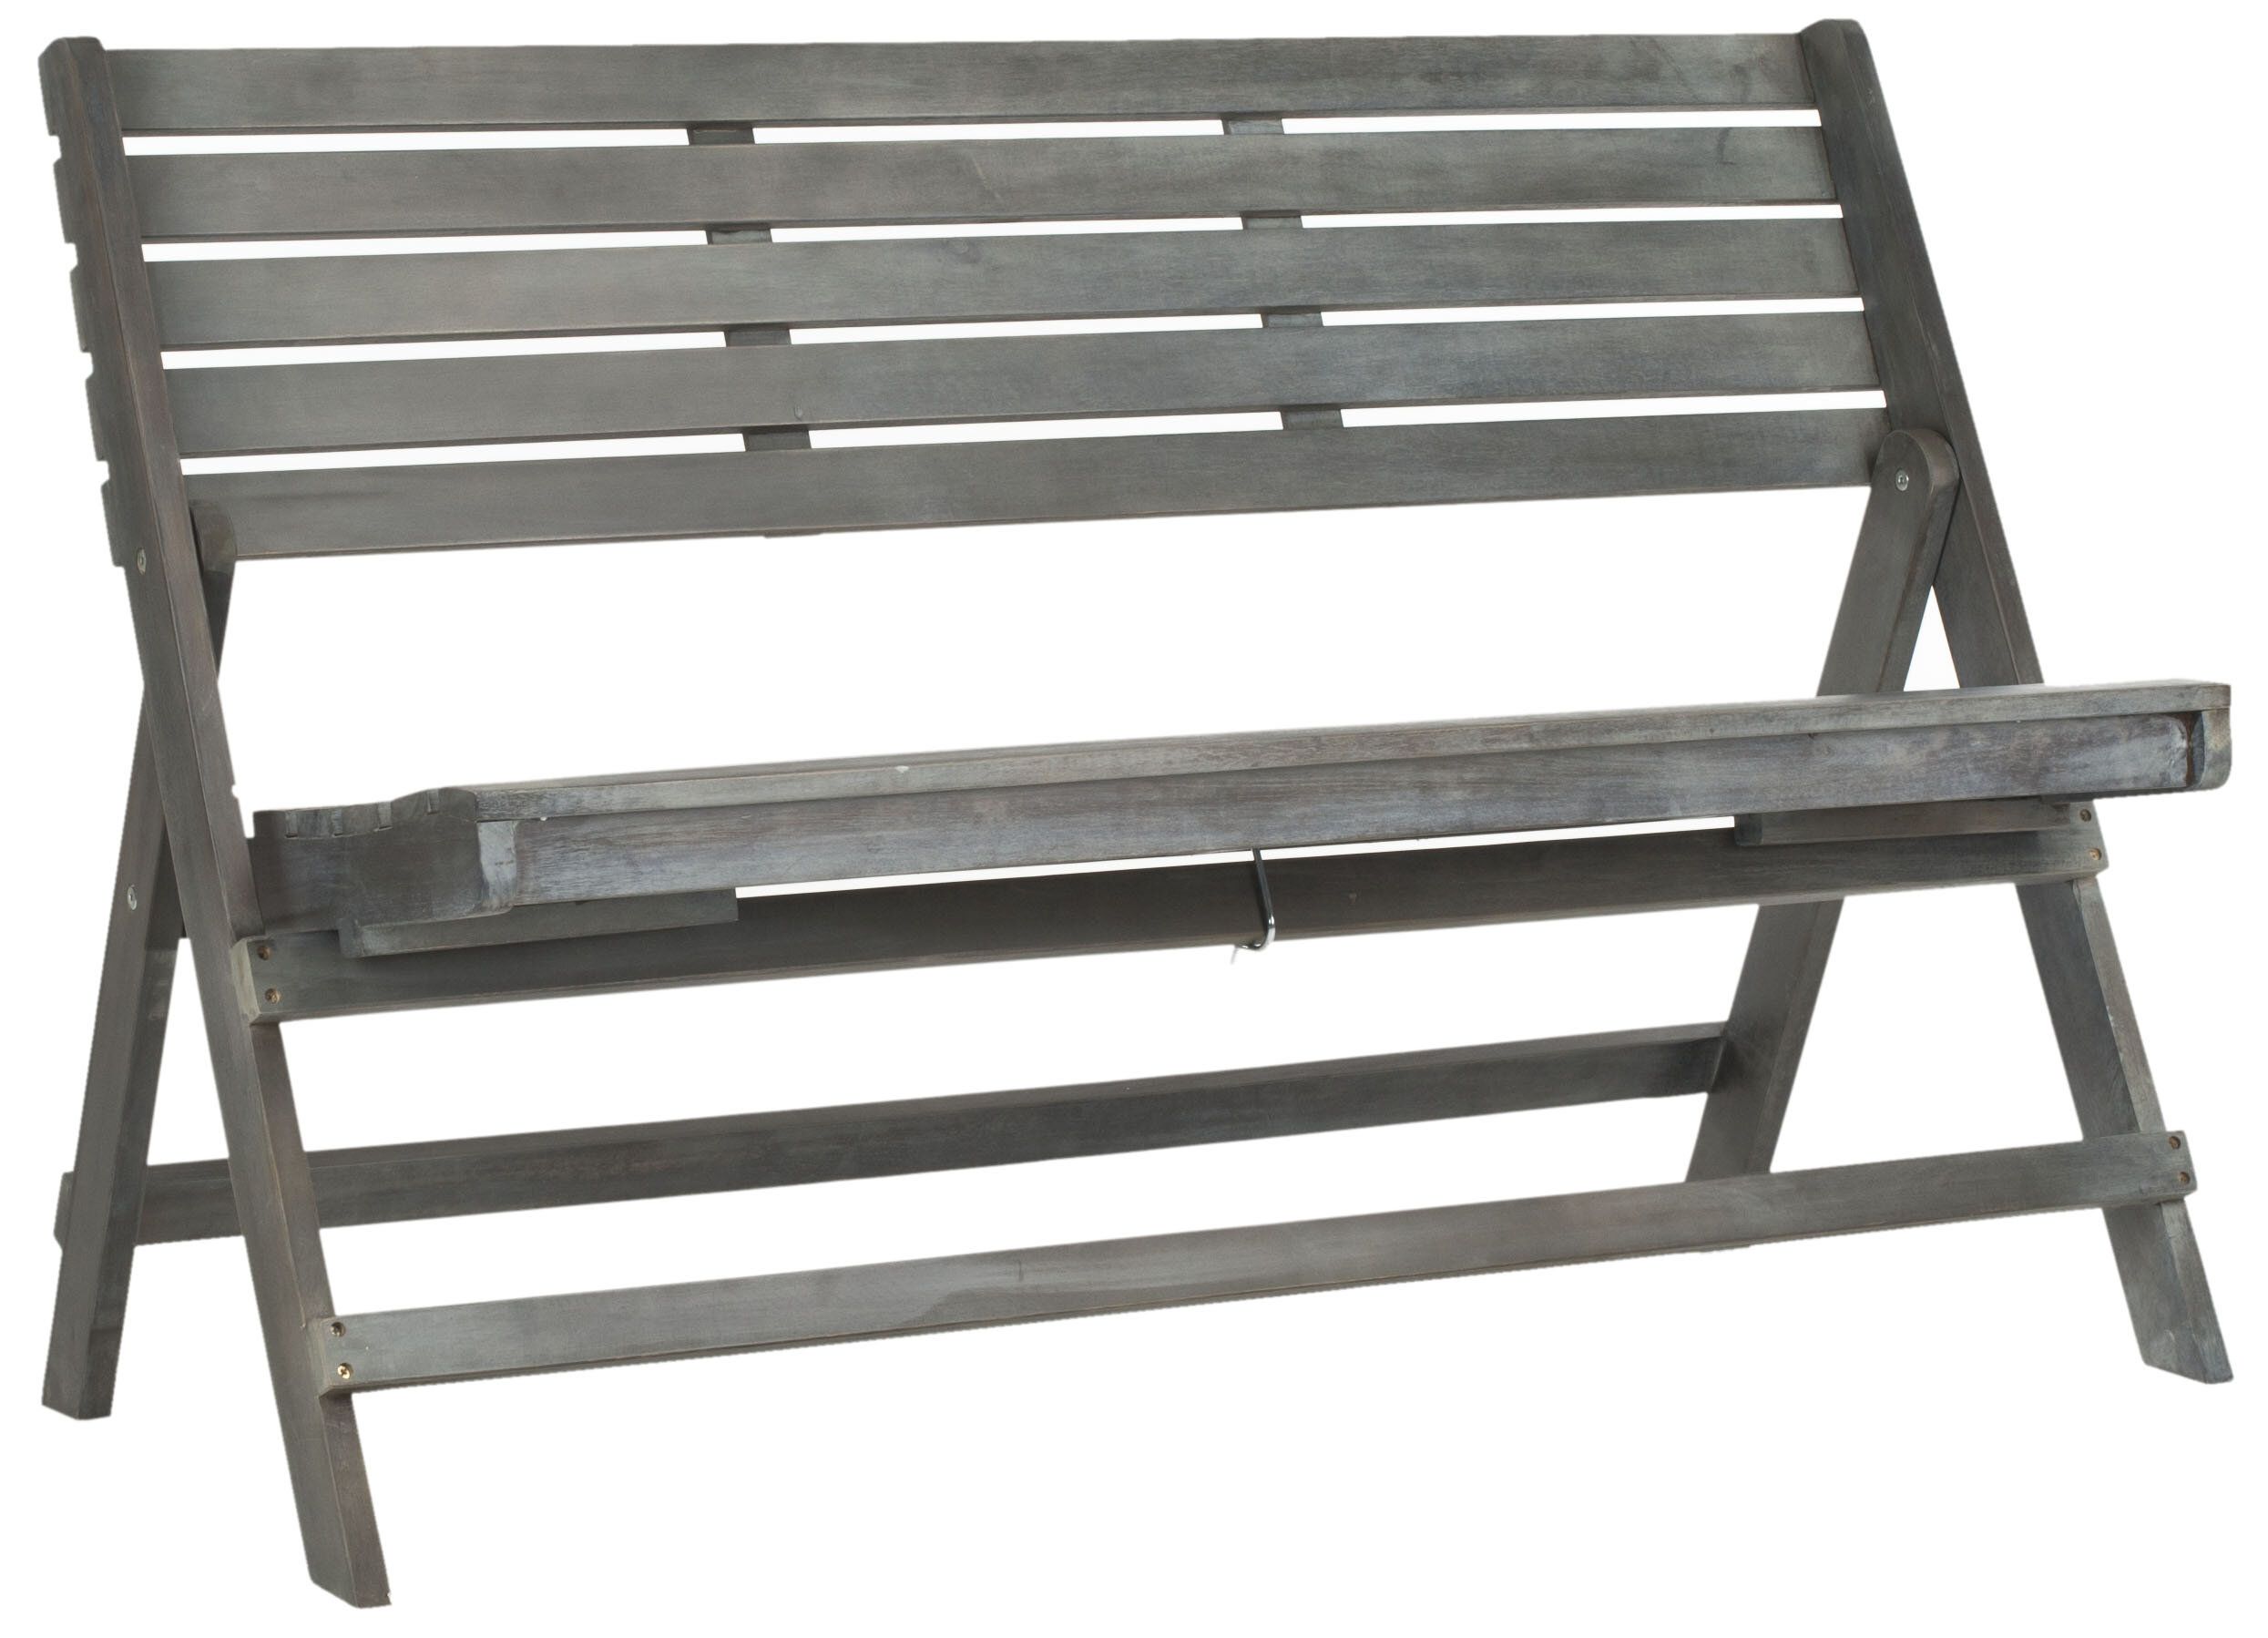 Mignardise Wooden Garden Bench With Alvah Slatted Cast Iron And Tubular Steel Garden Benches (View 10 of 25)